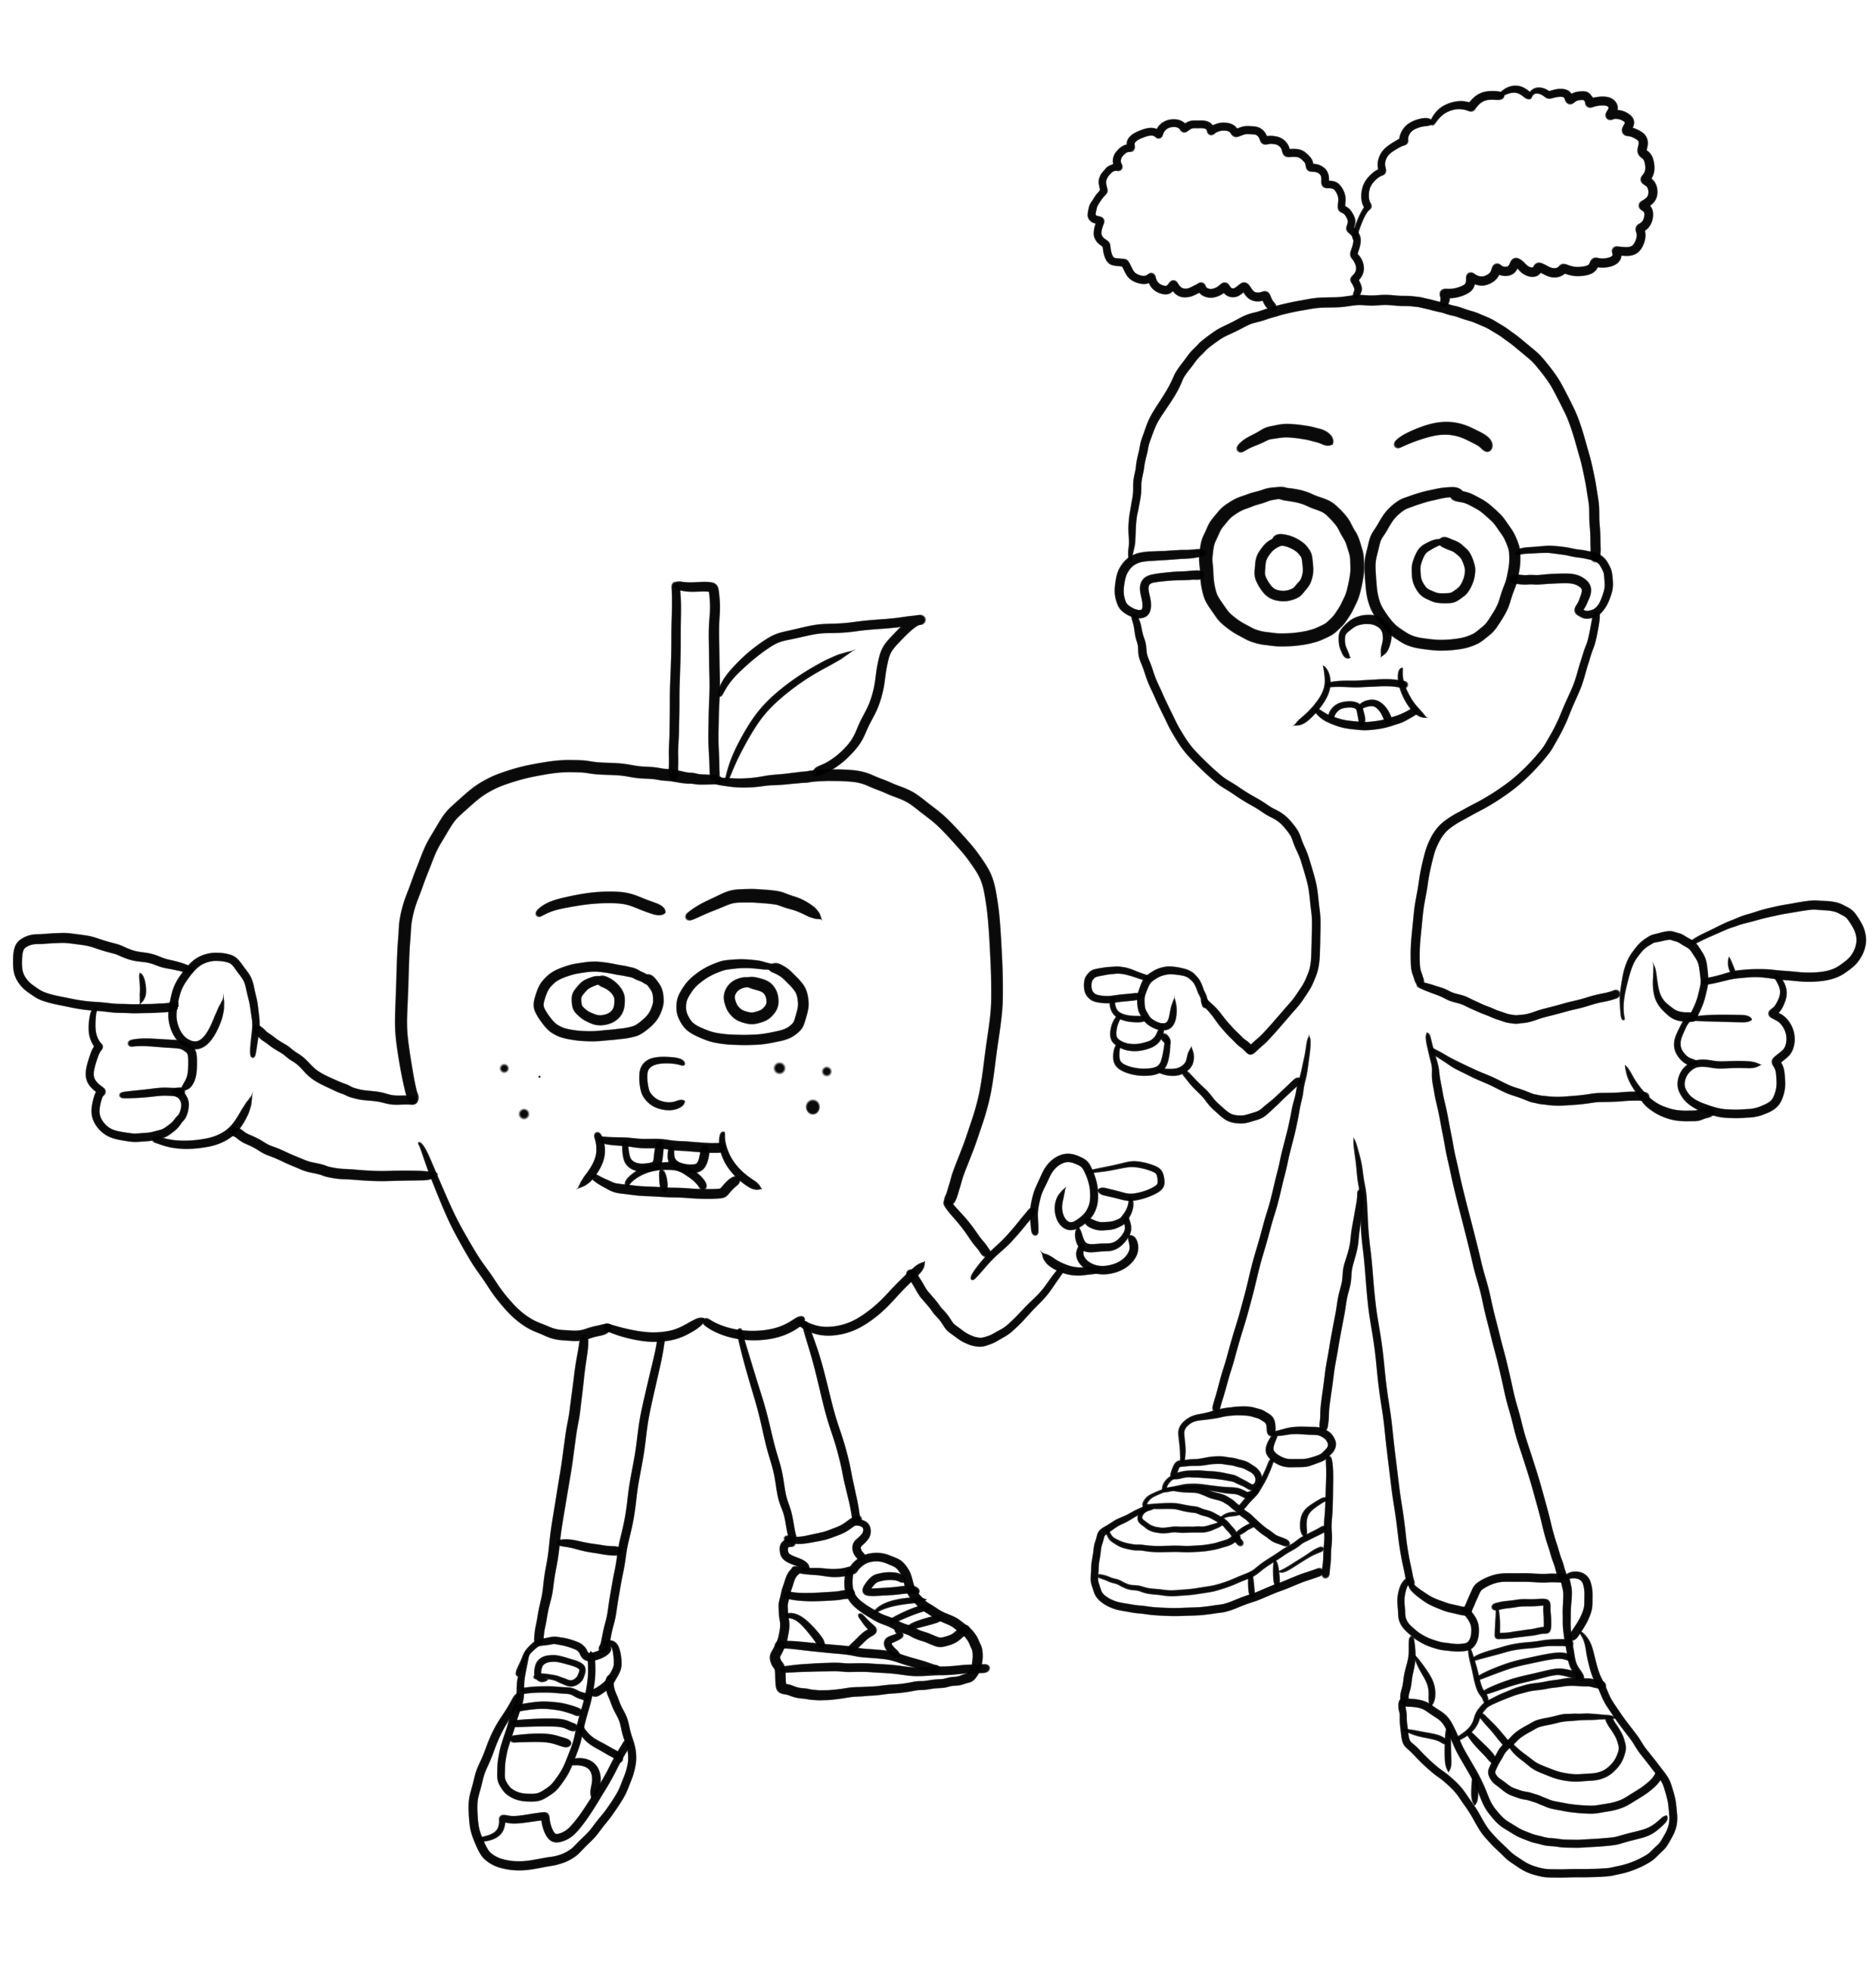 Apple & Onion 03 coloring page to print and color